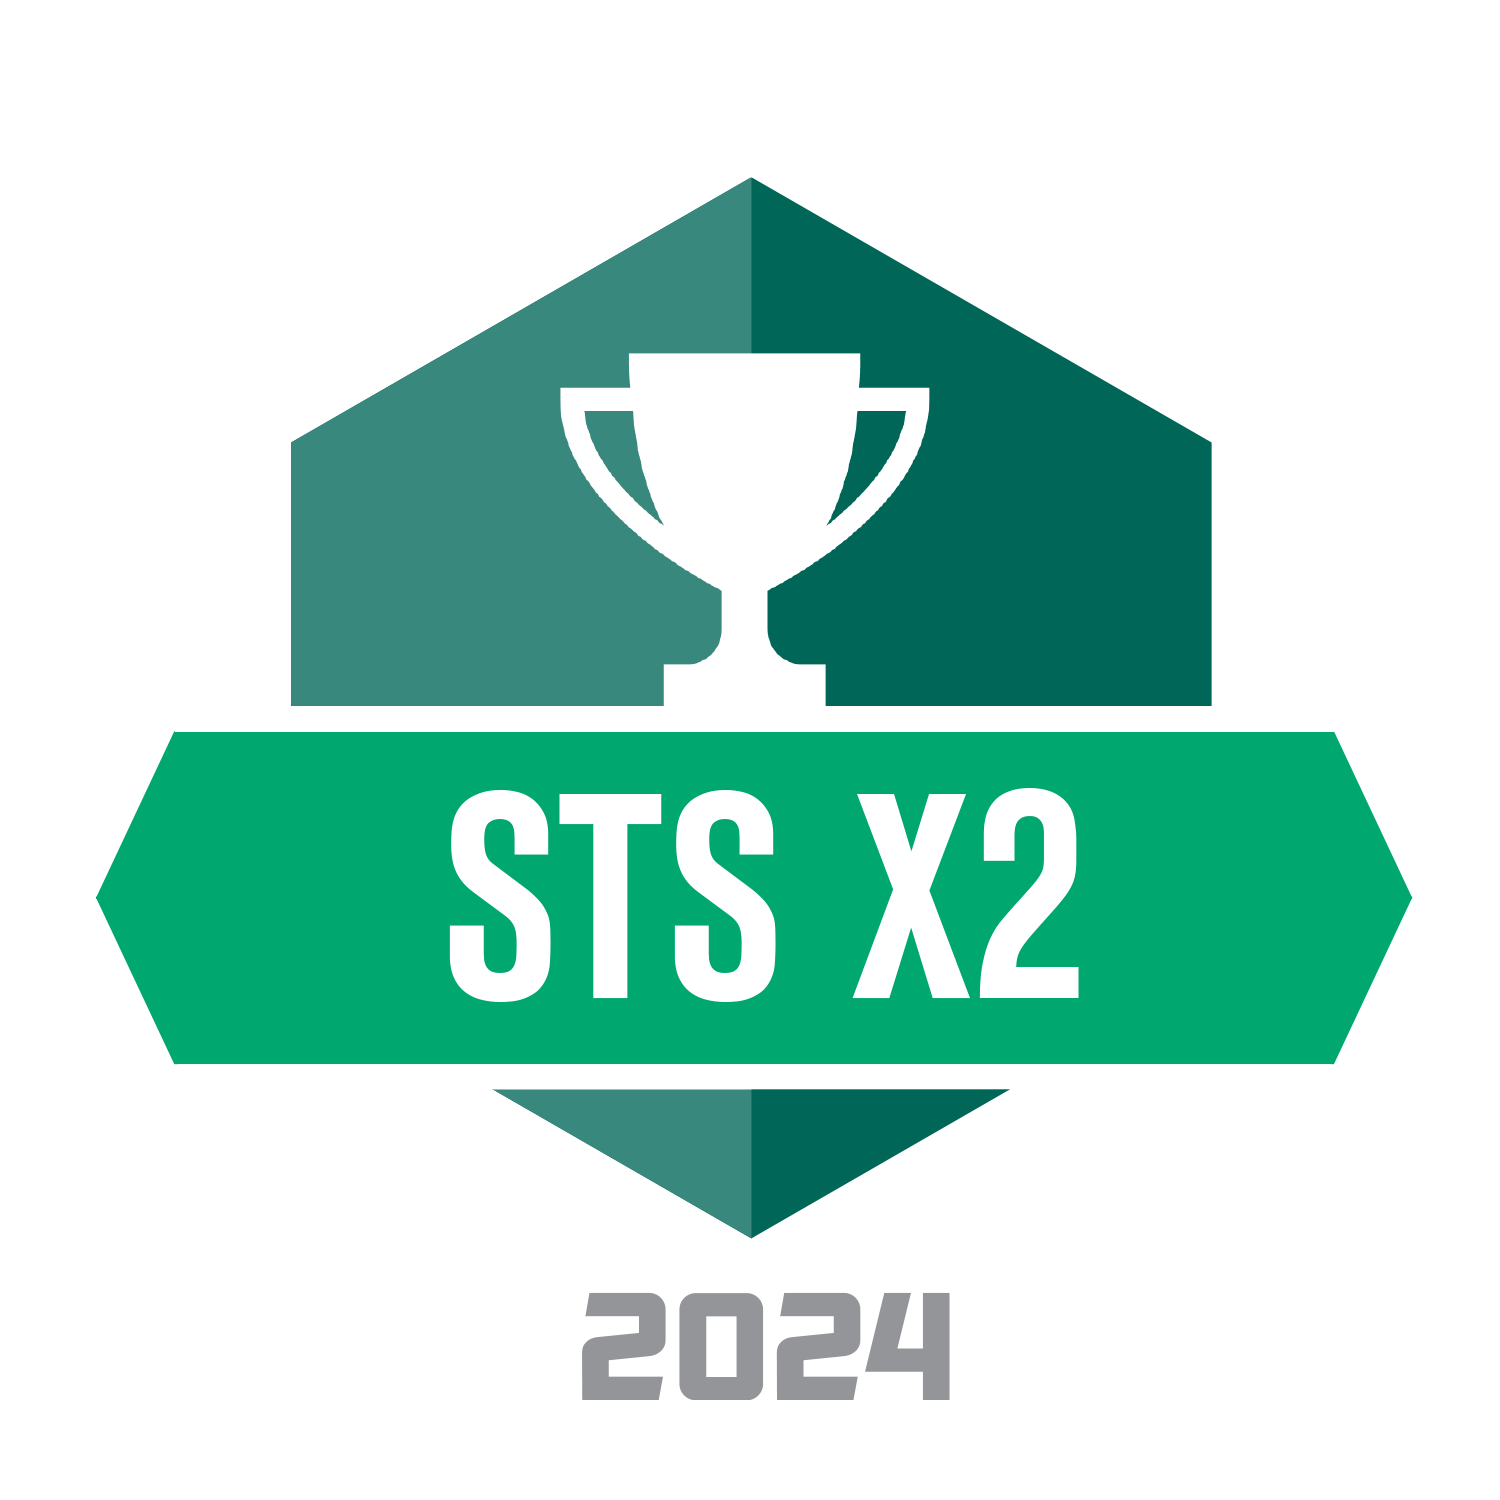 sts x2 2024 badge